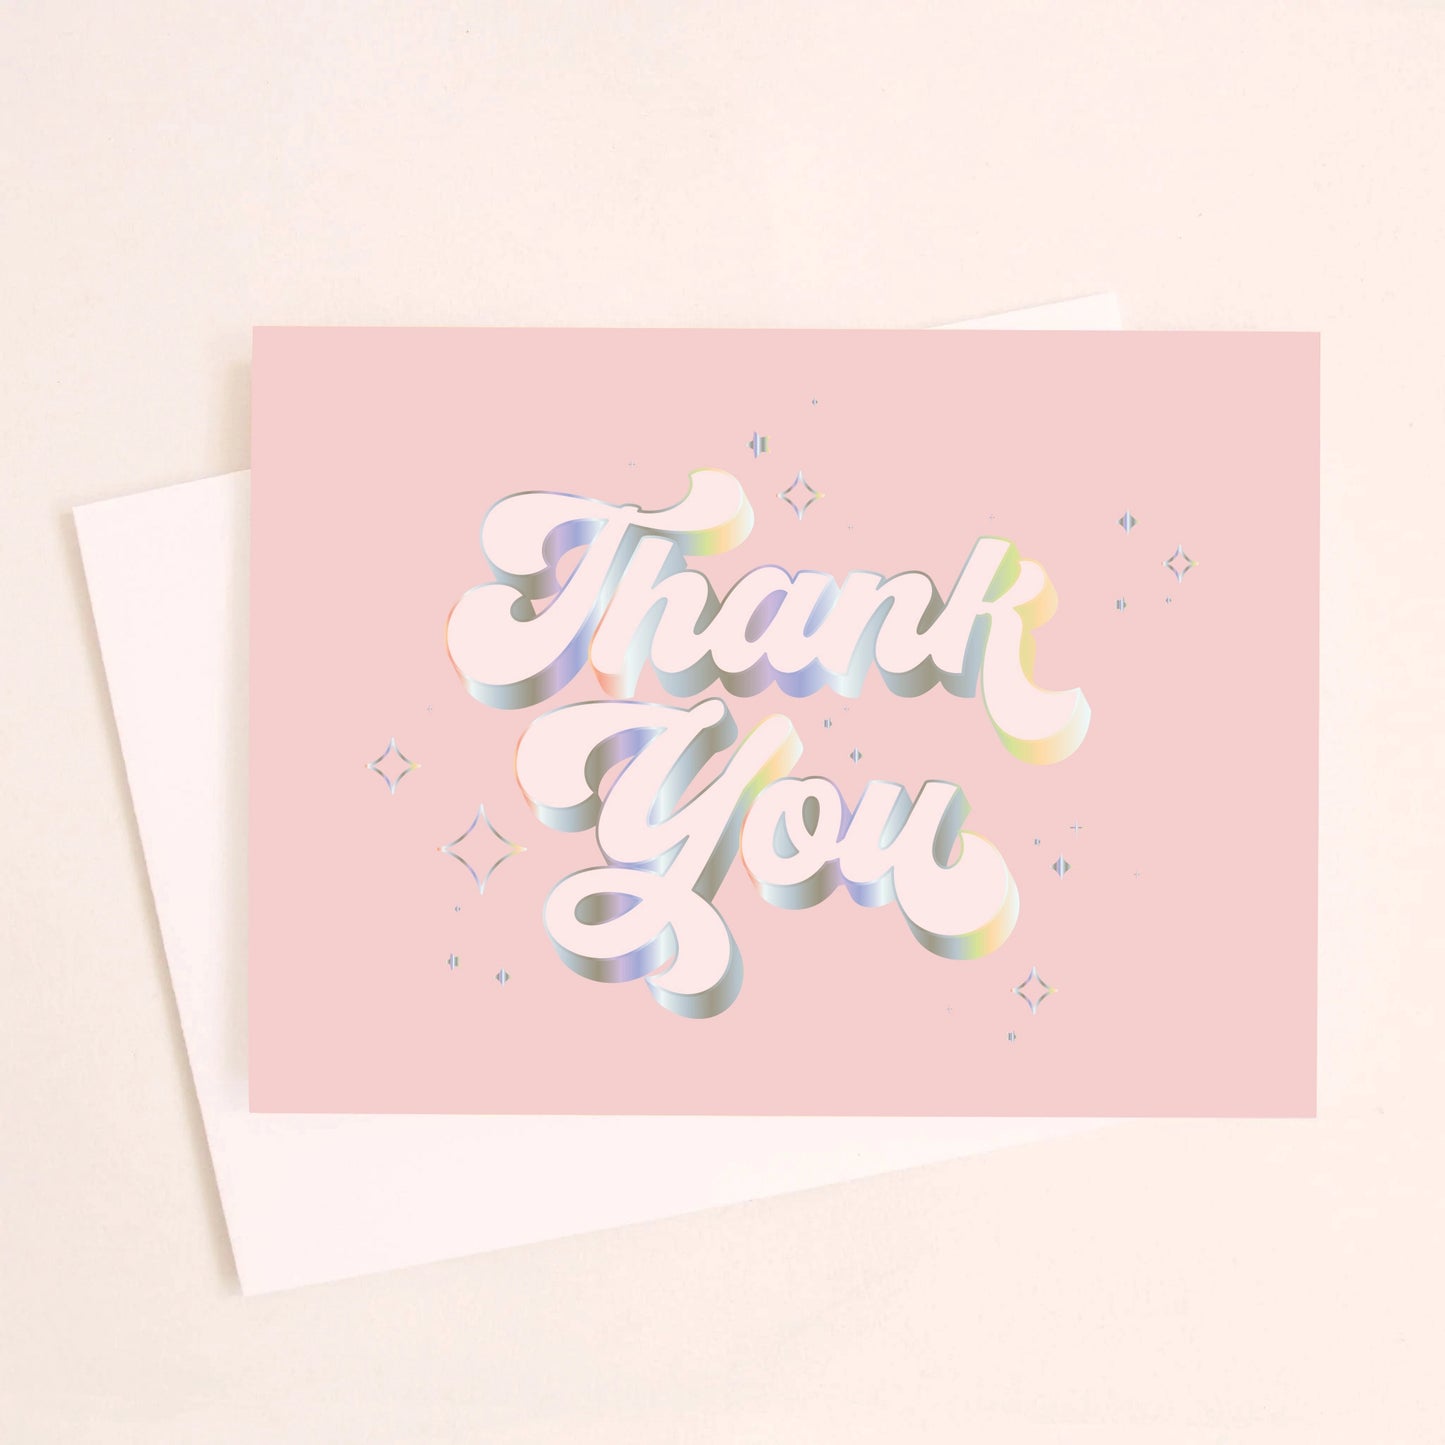 On an ivory background is a light pink card that reads, "Thank You" with in white text with holographic outlining. 